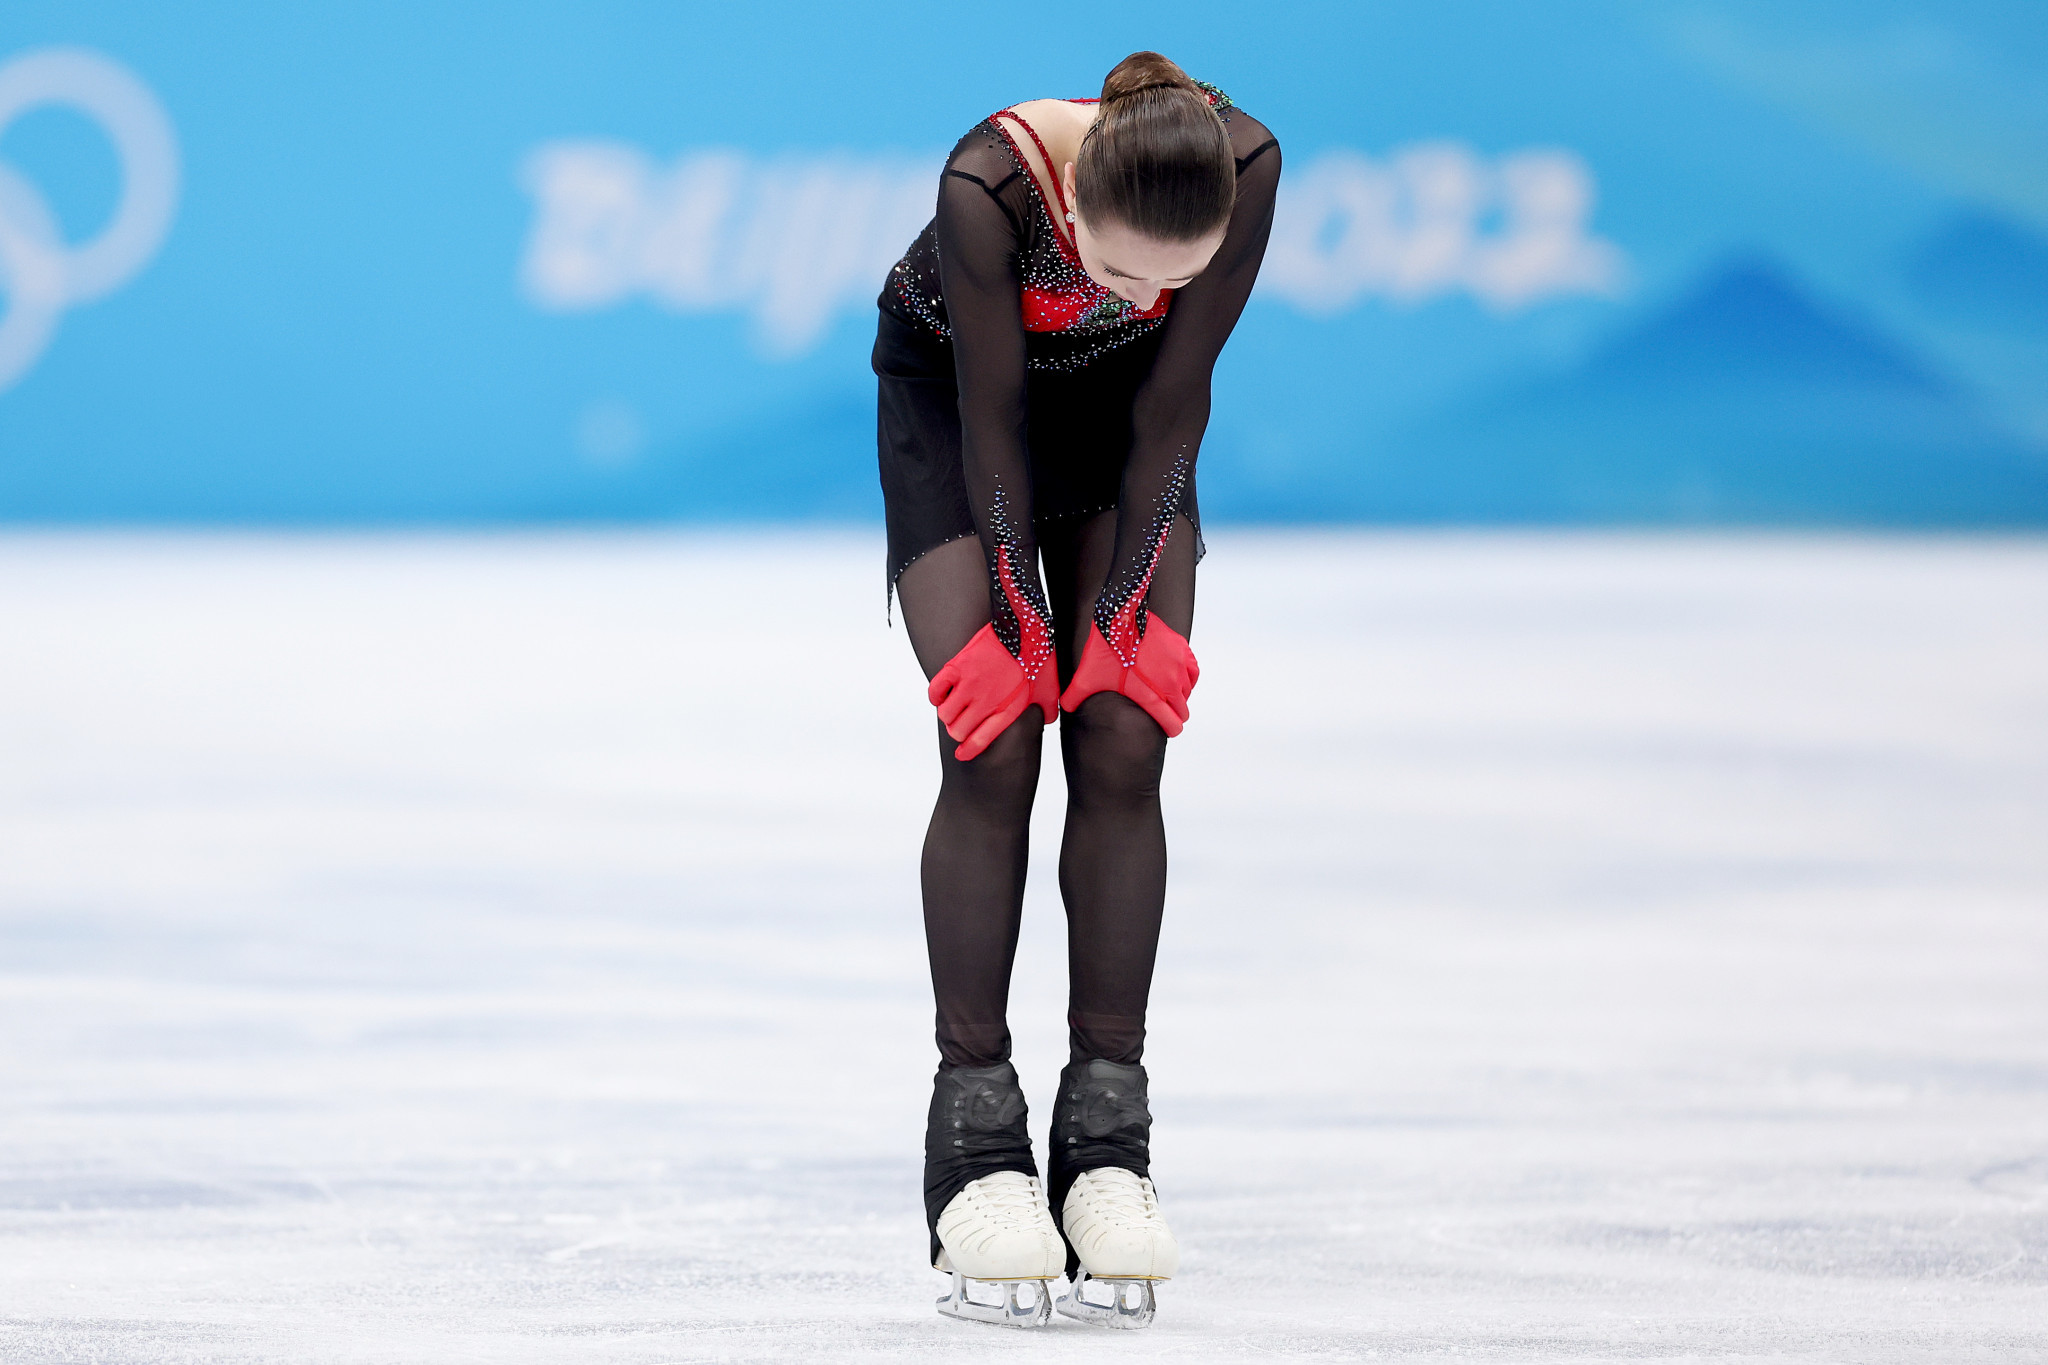 Kamila Valieva was only 15 years old when her positive test was made public ©Getty Images